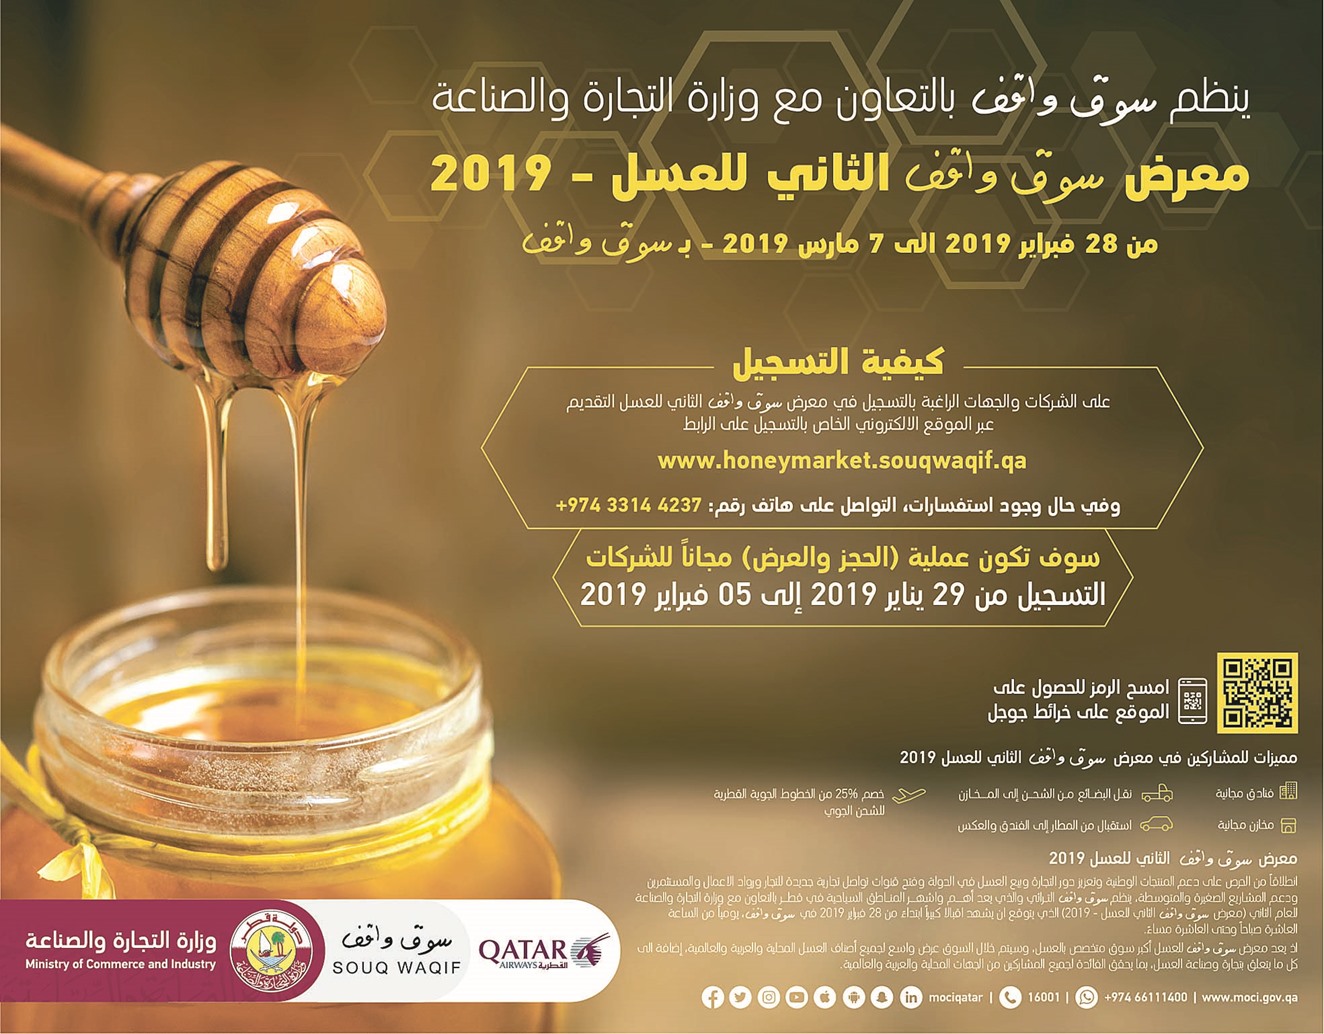 Honey Market at Souq Waqif to open next month